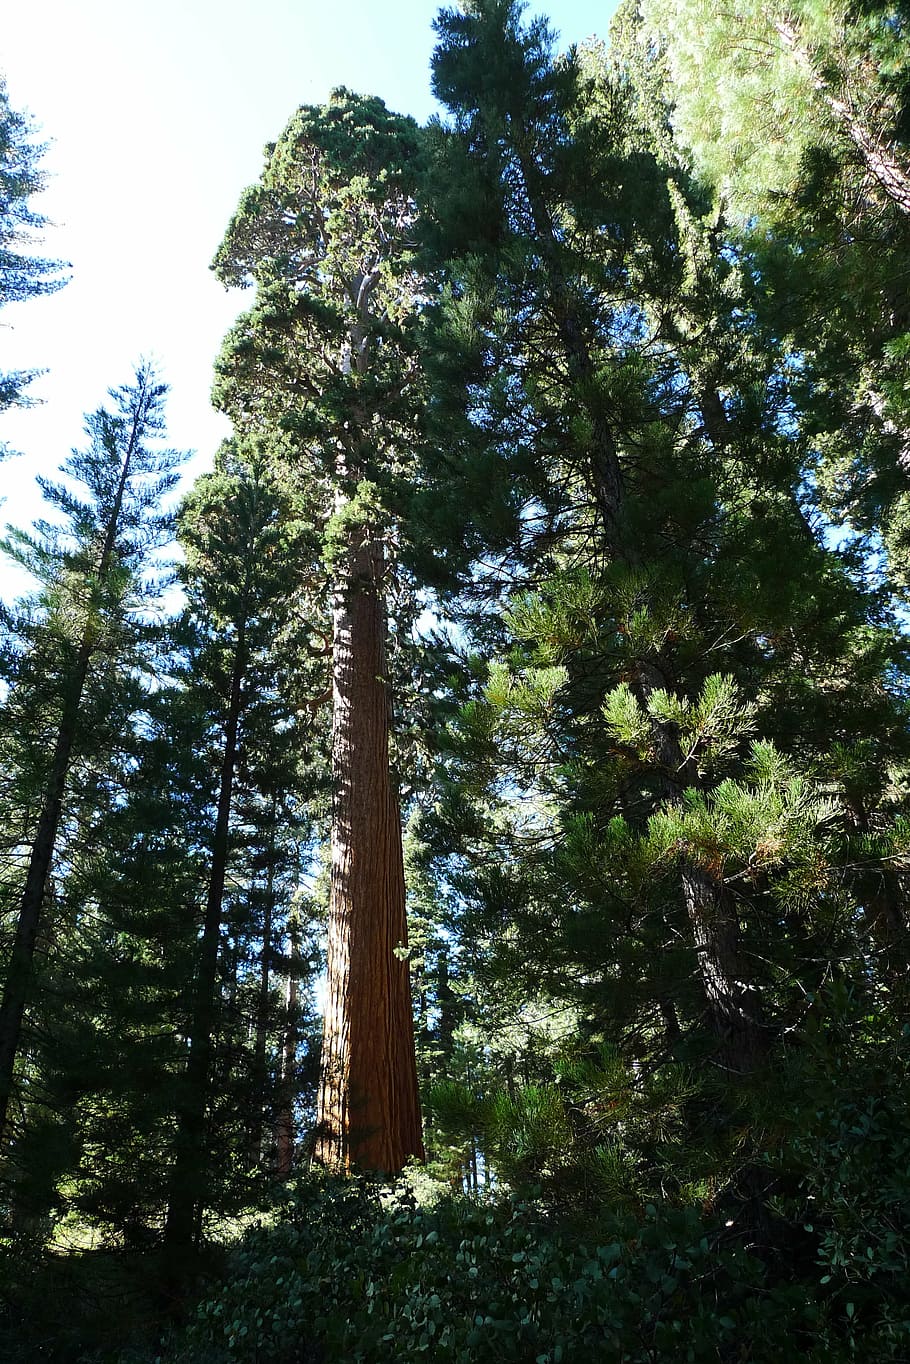 redwood, tree, nature, forest, wood, sequoia, california, tall, plant, growth